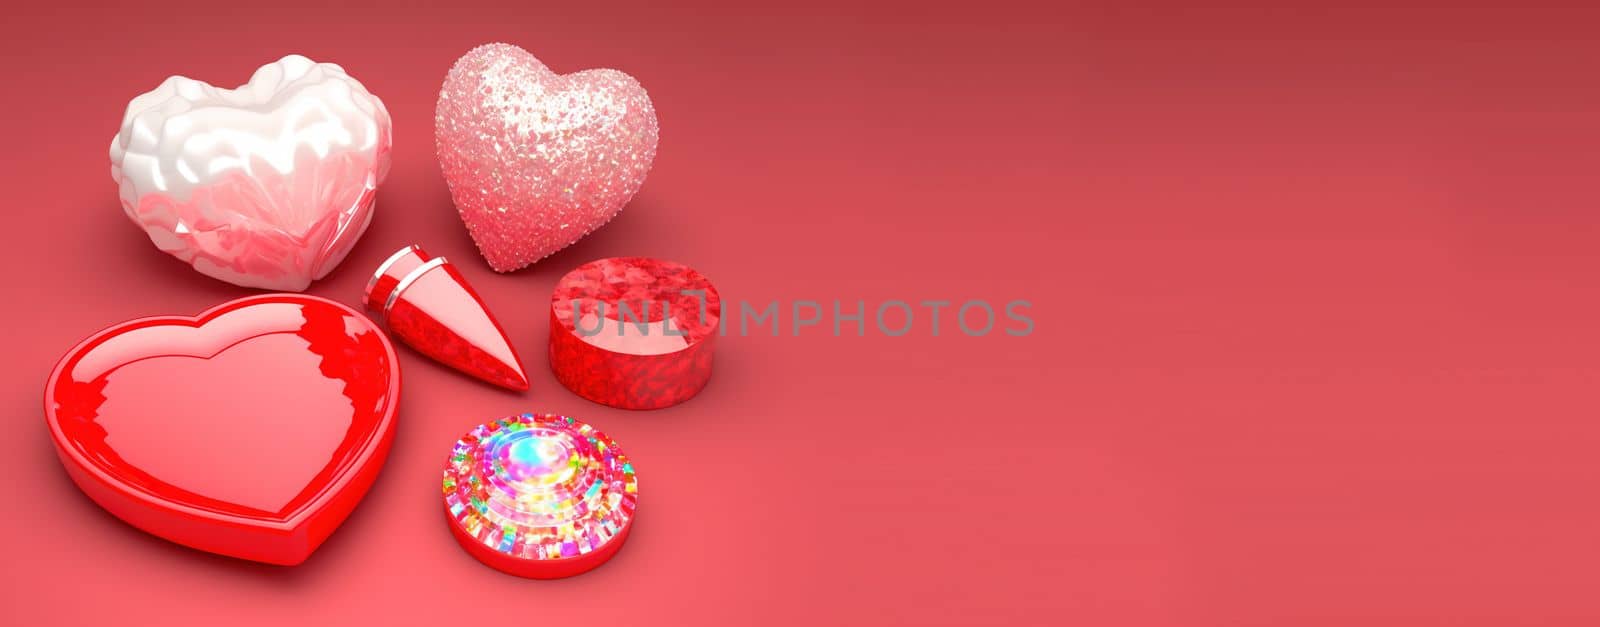 Valentine's Day 3D Illustration Design Heart Diamond and Crystal Themed Banner and Background by templator